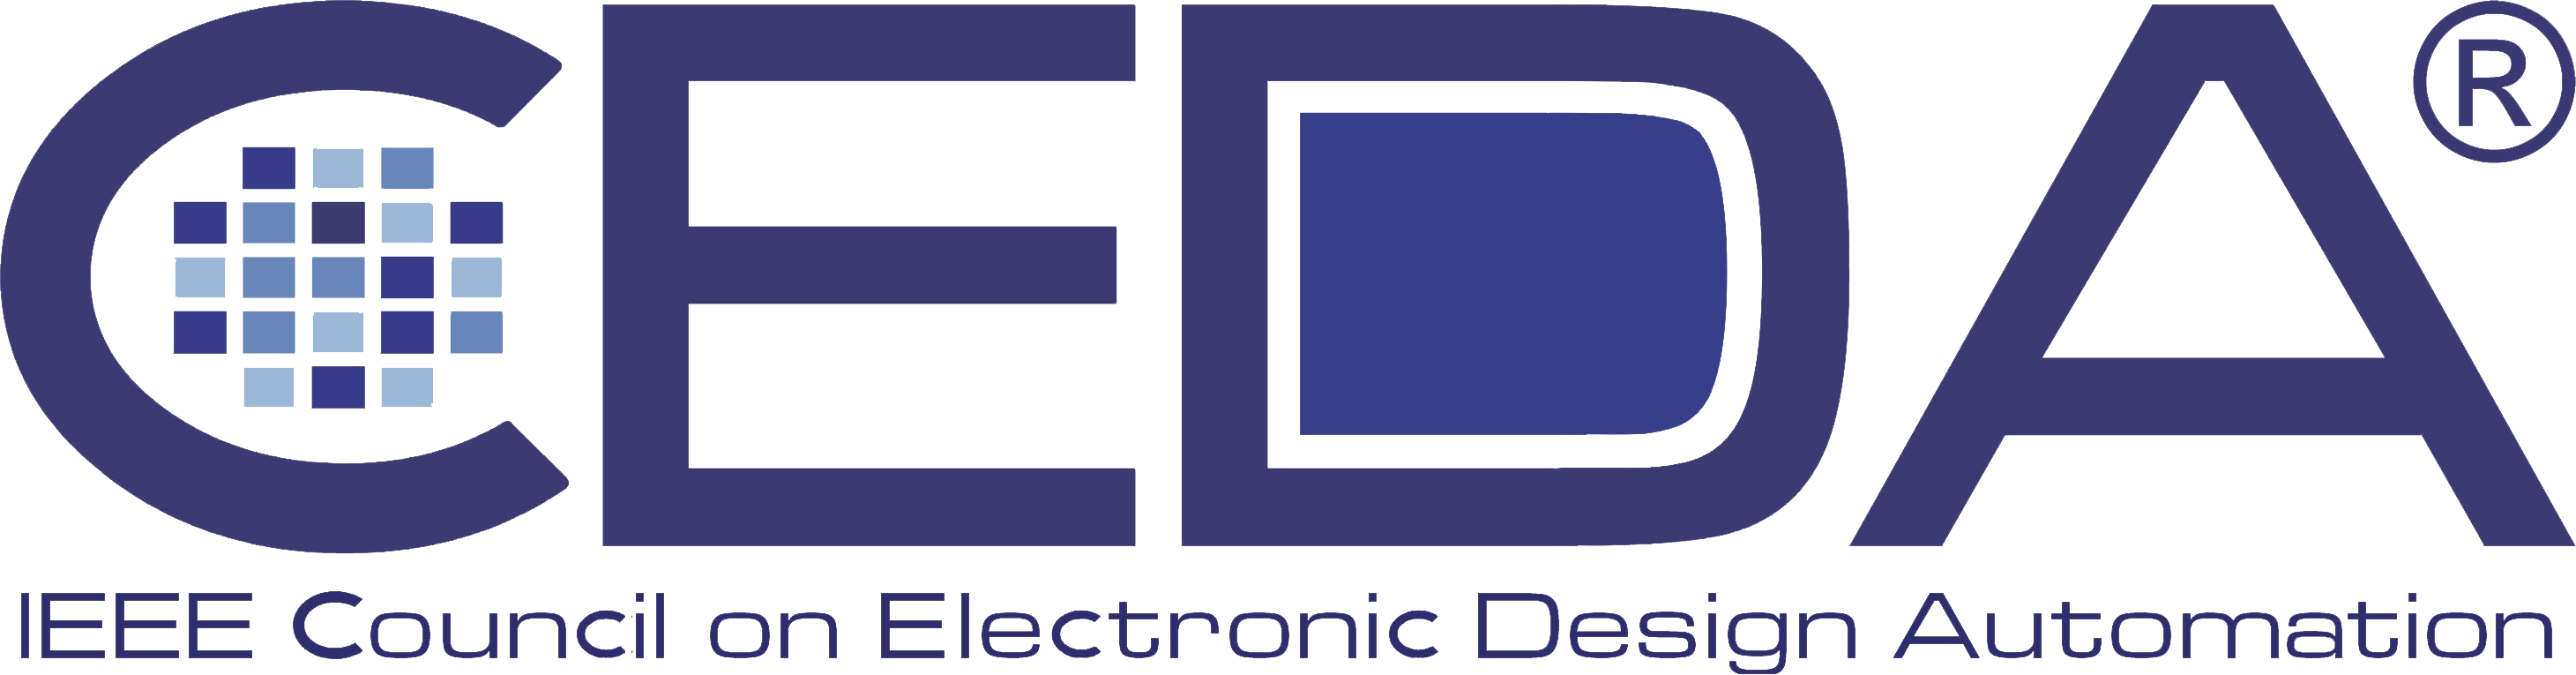 IEEE Council on Electronic Design Automation (IEEE CEDA)